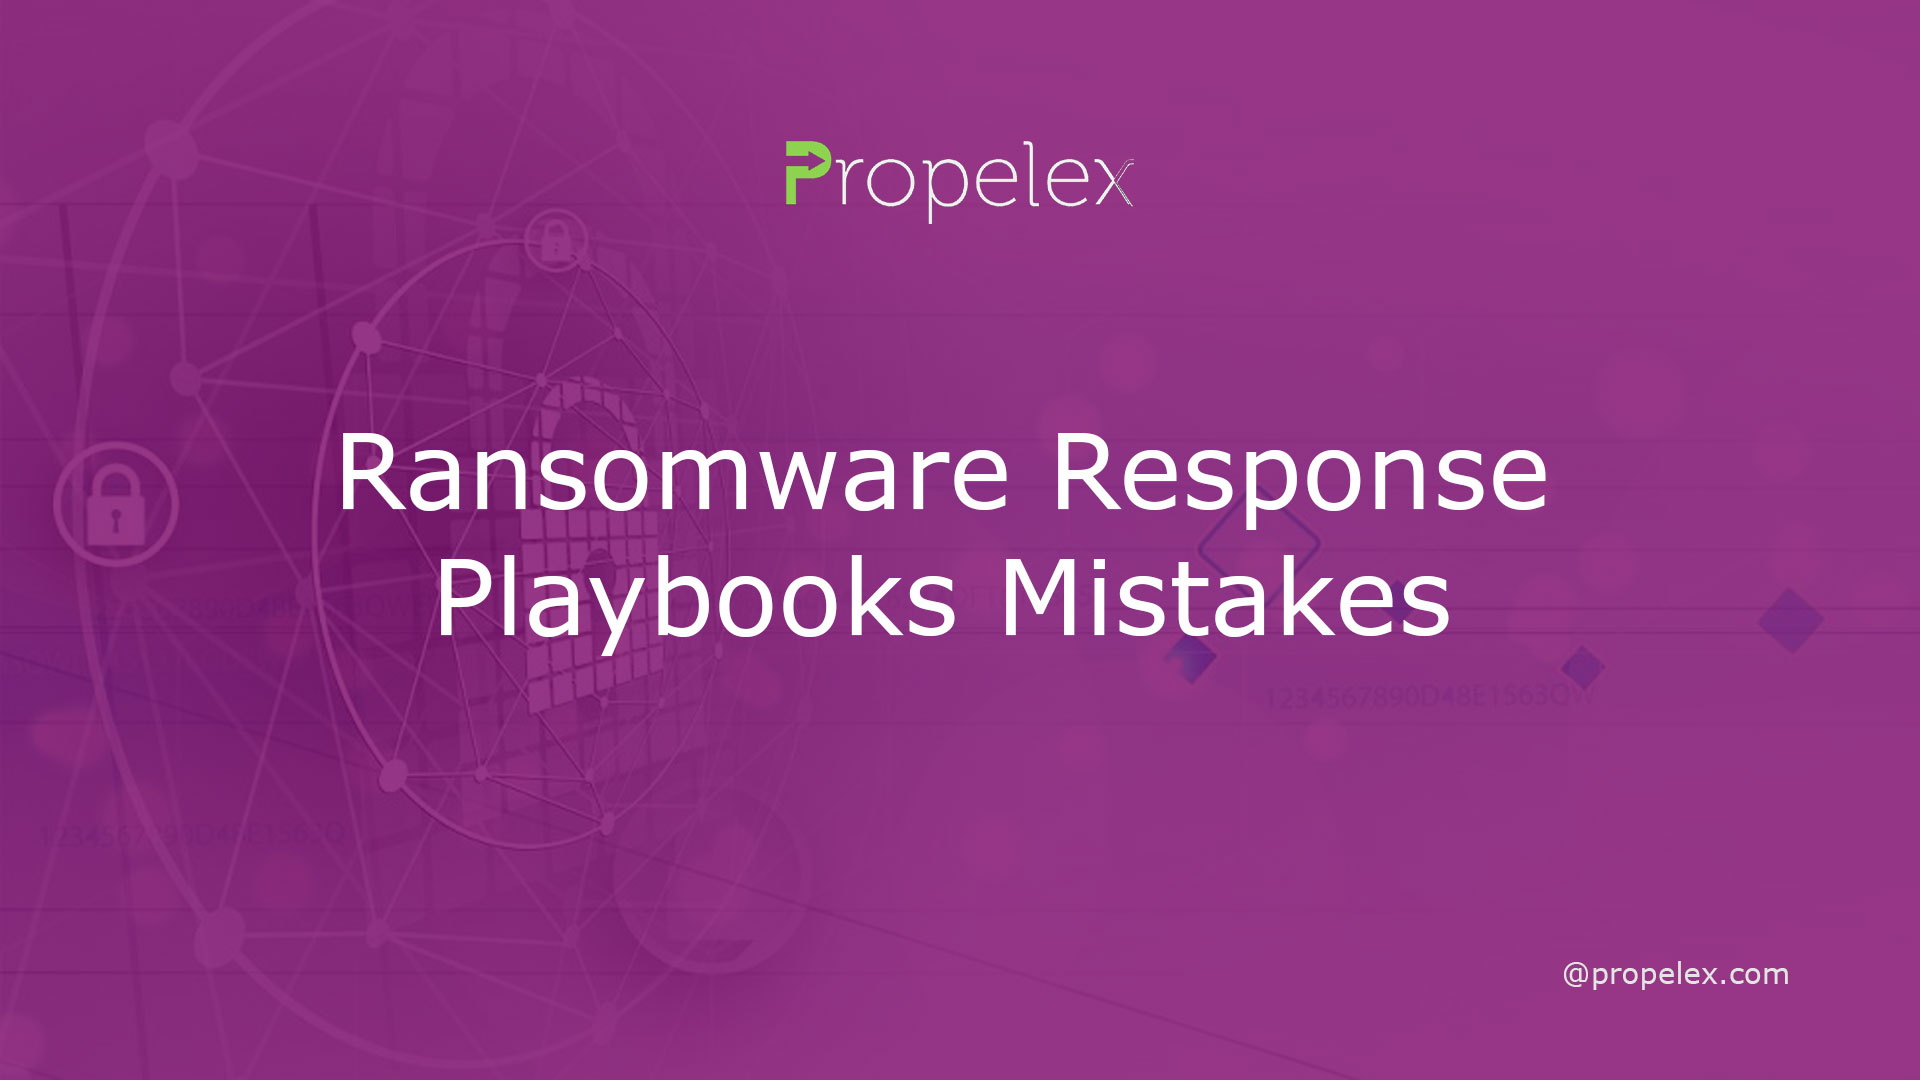 Ransomware Response Playbooks Mistakes